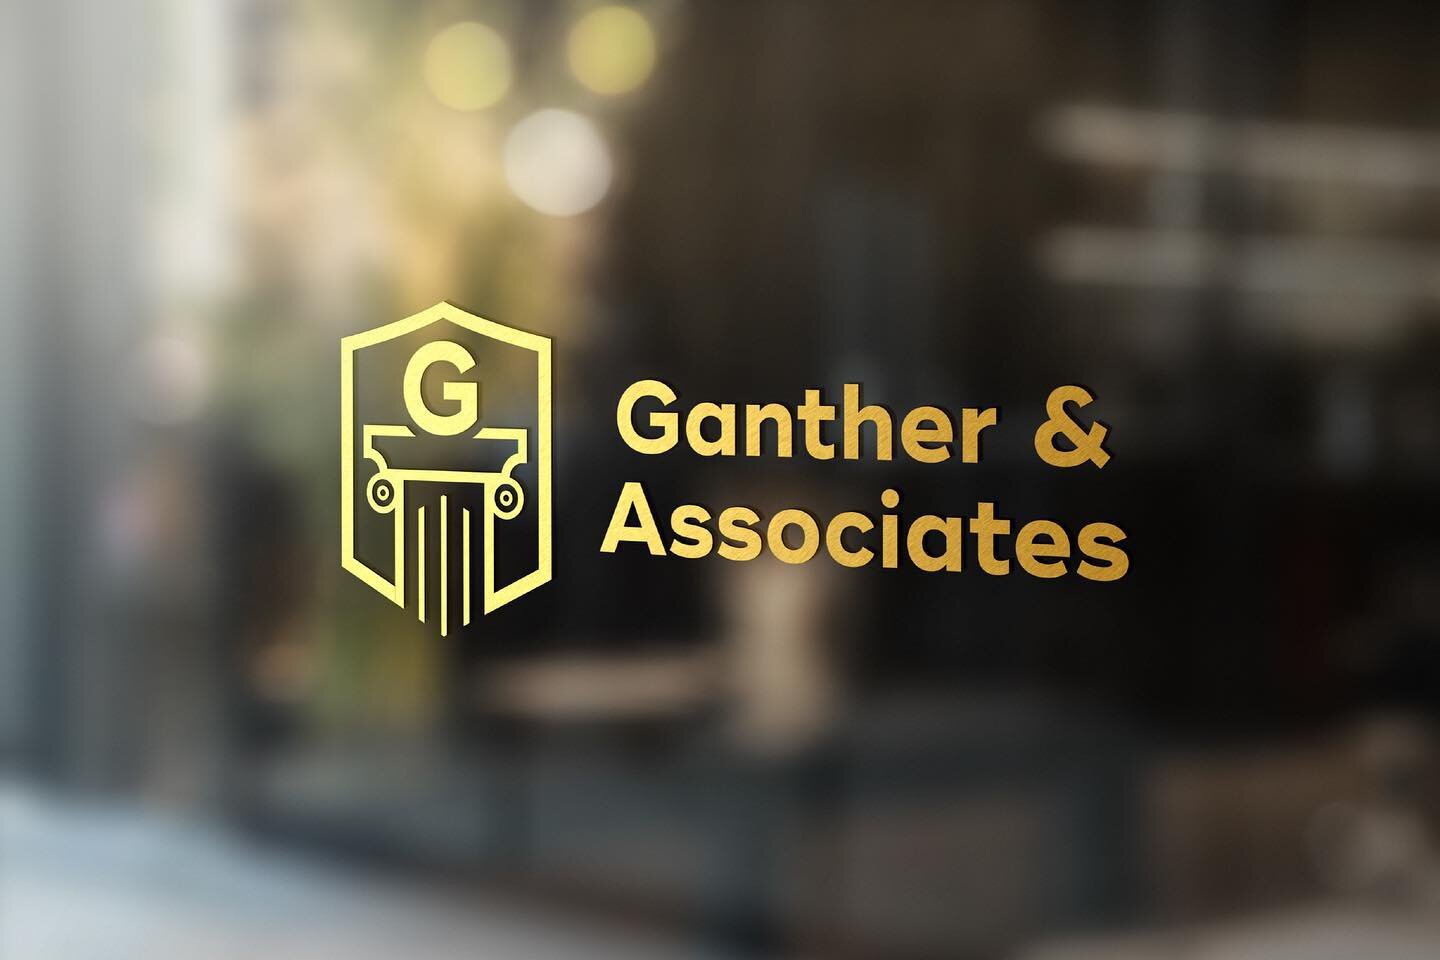 #tbt to crafting Ganther &amp; Associates branding and print pieces. The gold foil on black made this look pop. Swipe to see more branding elements.

#branding #graphicdesign #logo #logodesign #logodesinger #financial #goldfoil #throwbackthursday #lo